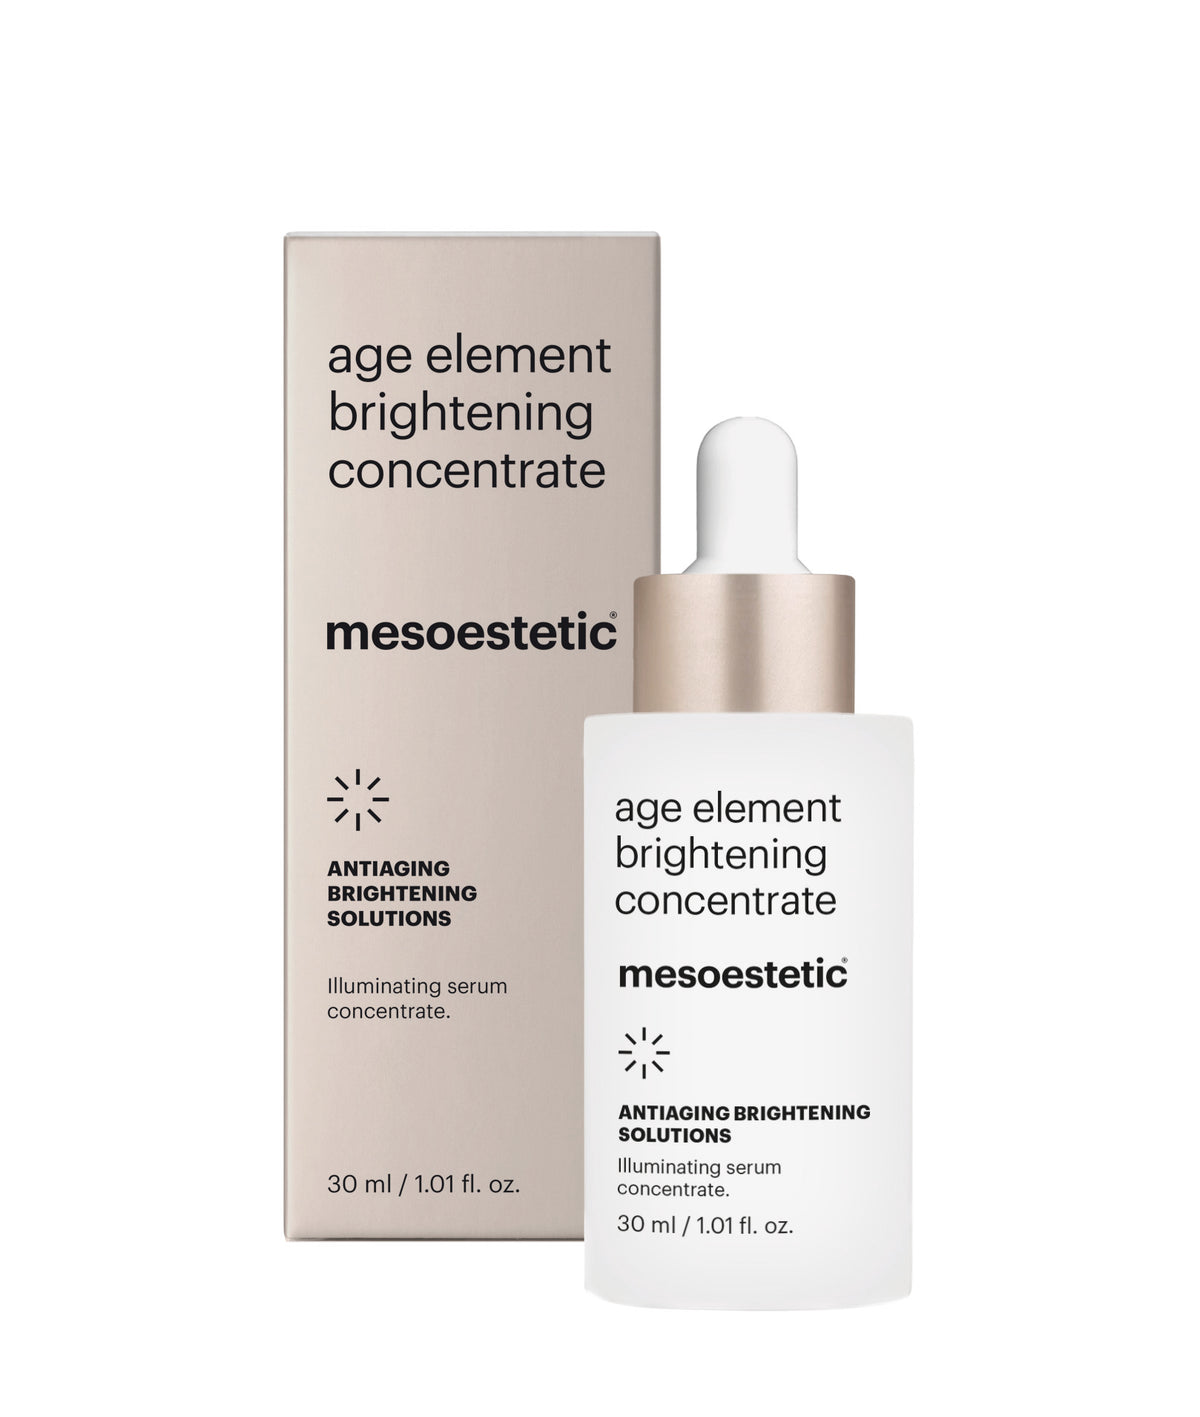 mesoestetic 水光維 C 祛黃提亮精華 age element® brightening concentrate